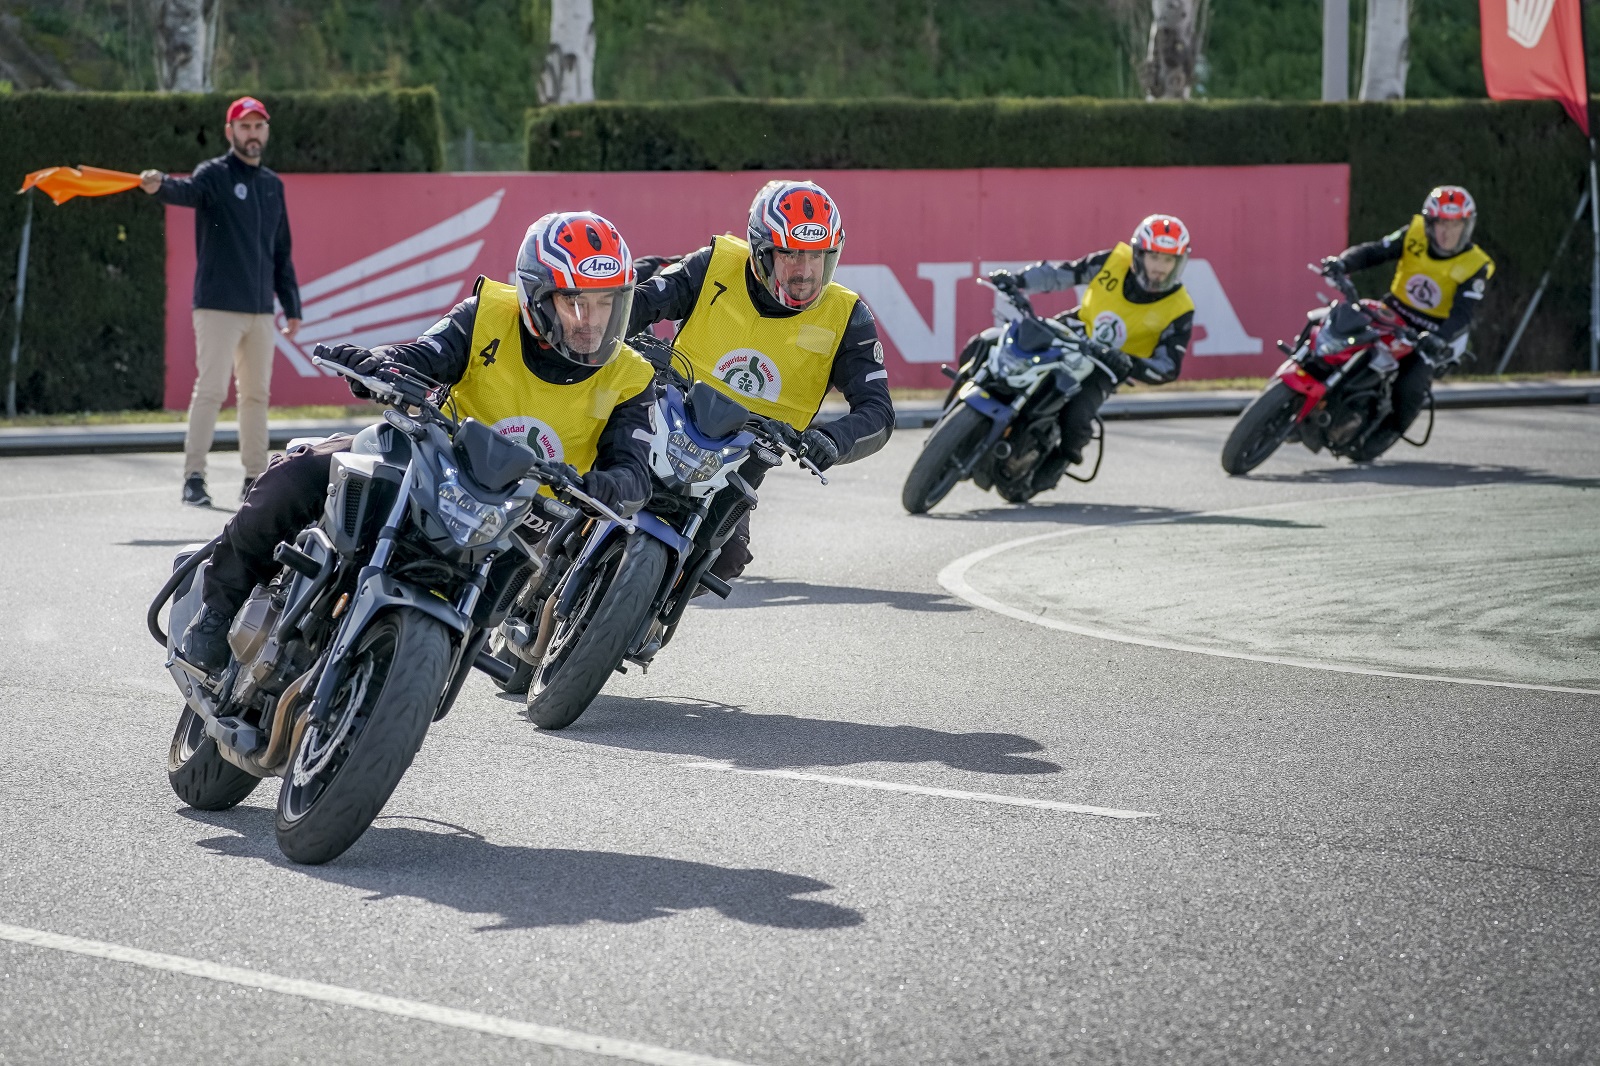 Advanced Motorcycle Course